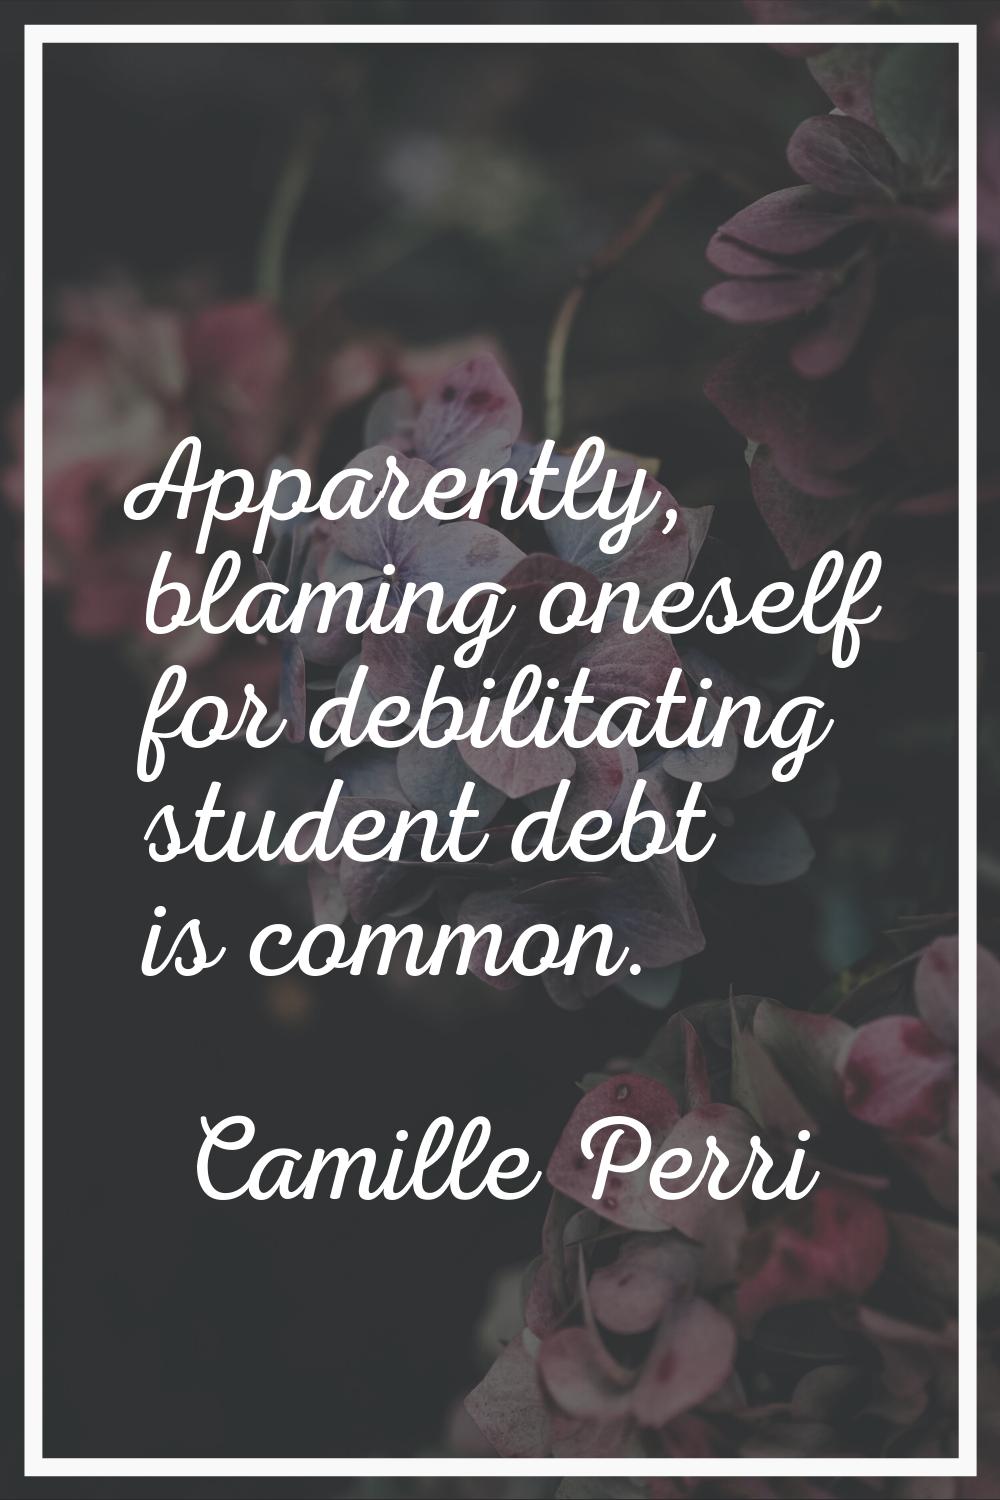 Apparently, blaming oneself for debilitating student debt is common.